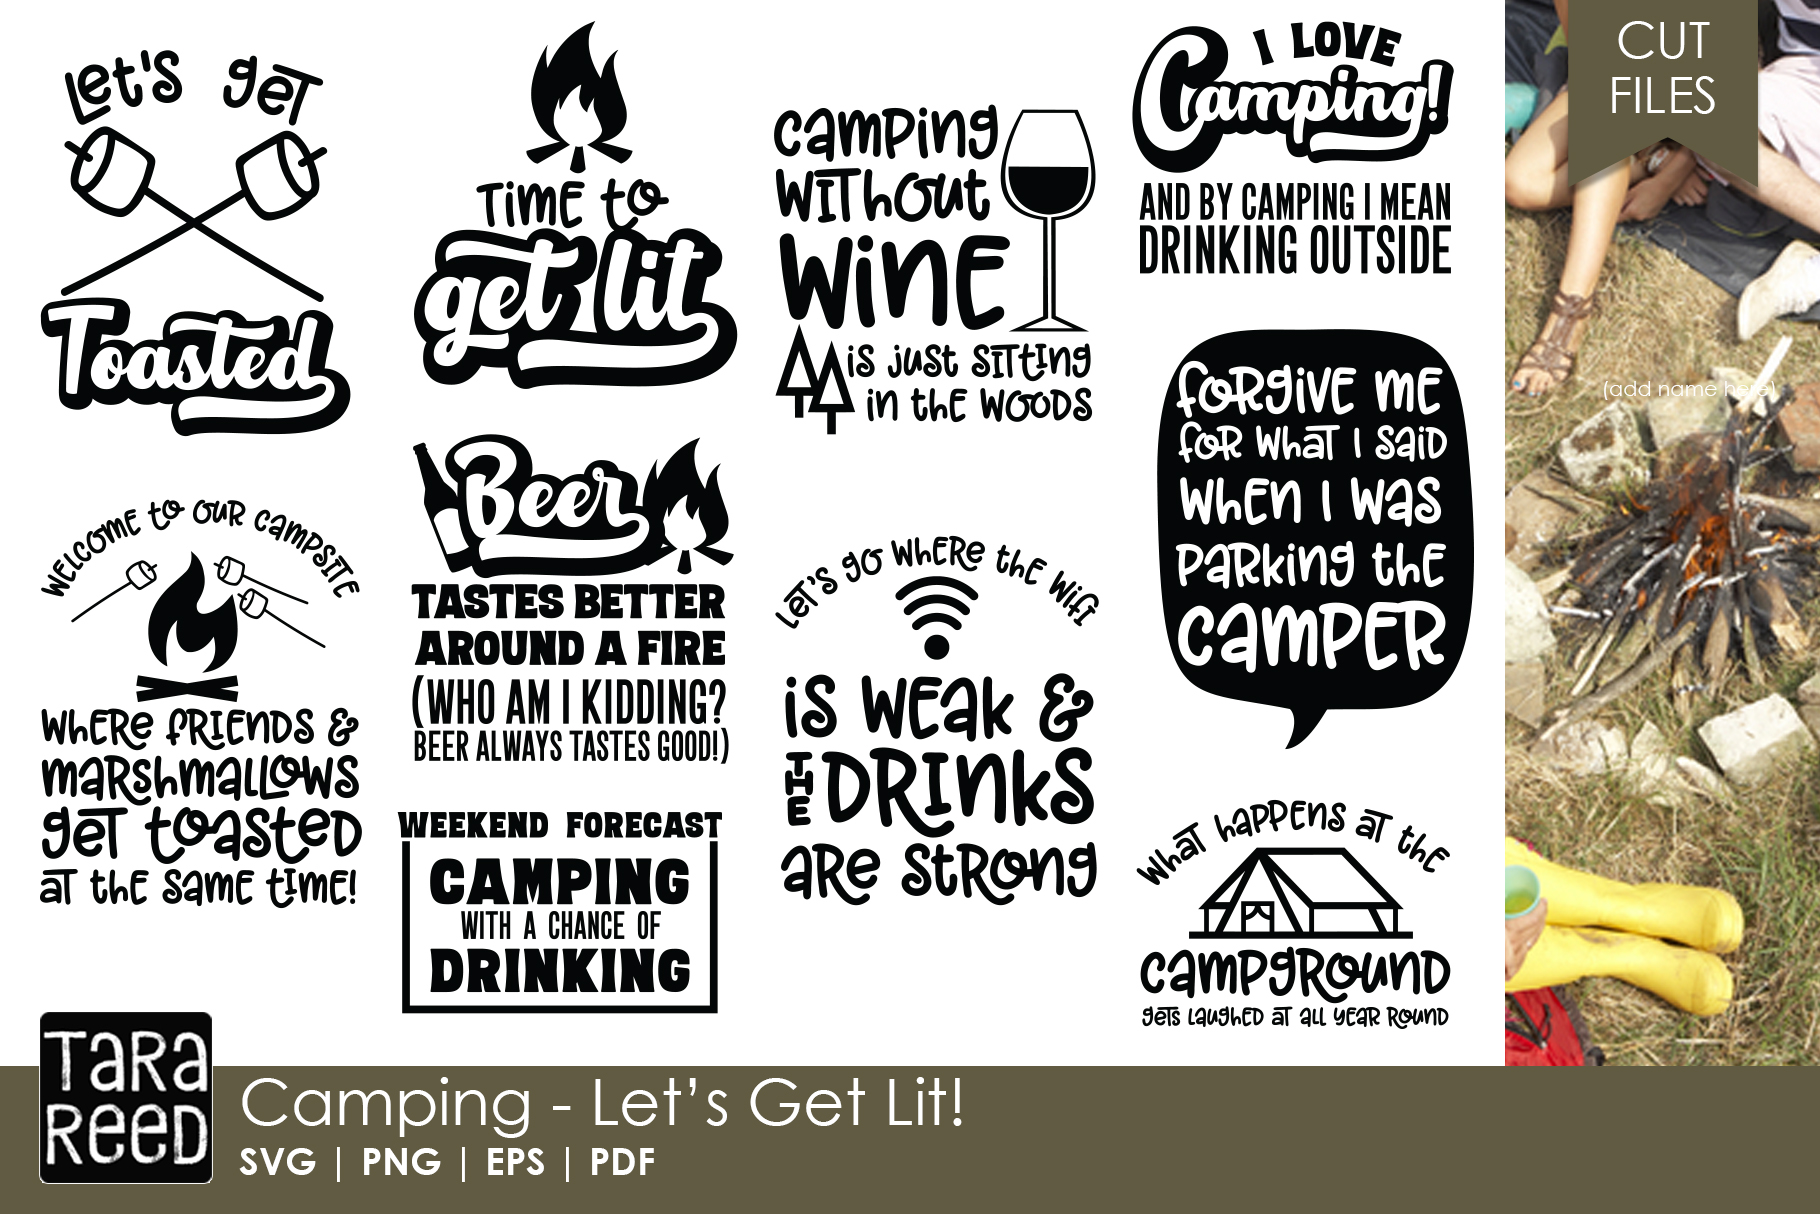 Let's Get Lit! - Camping SVG and Cut Files for Crafters